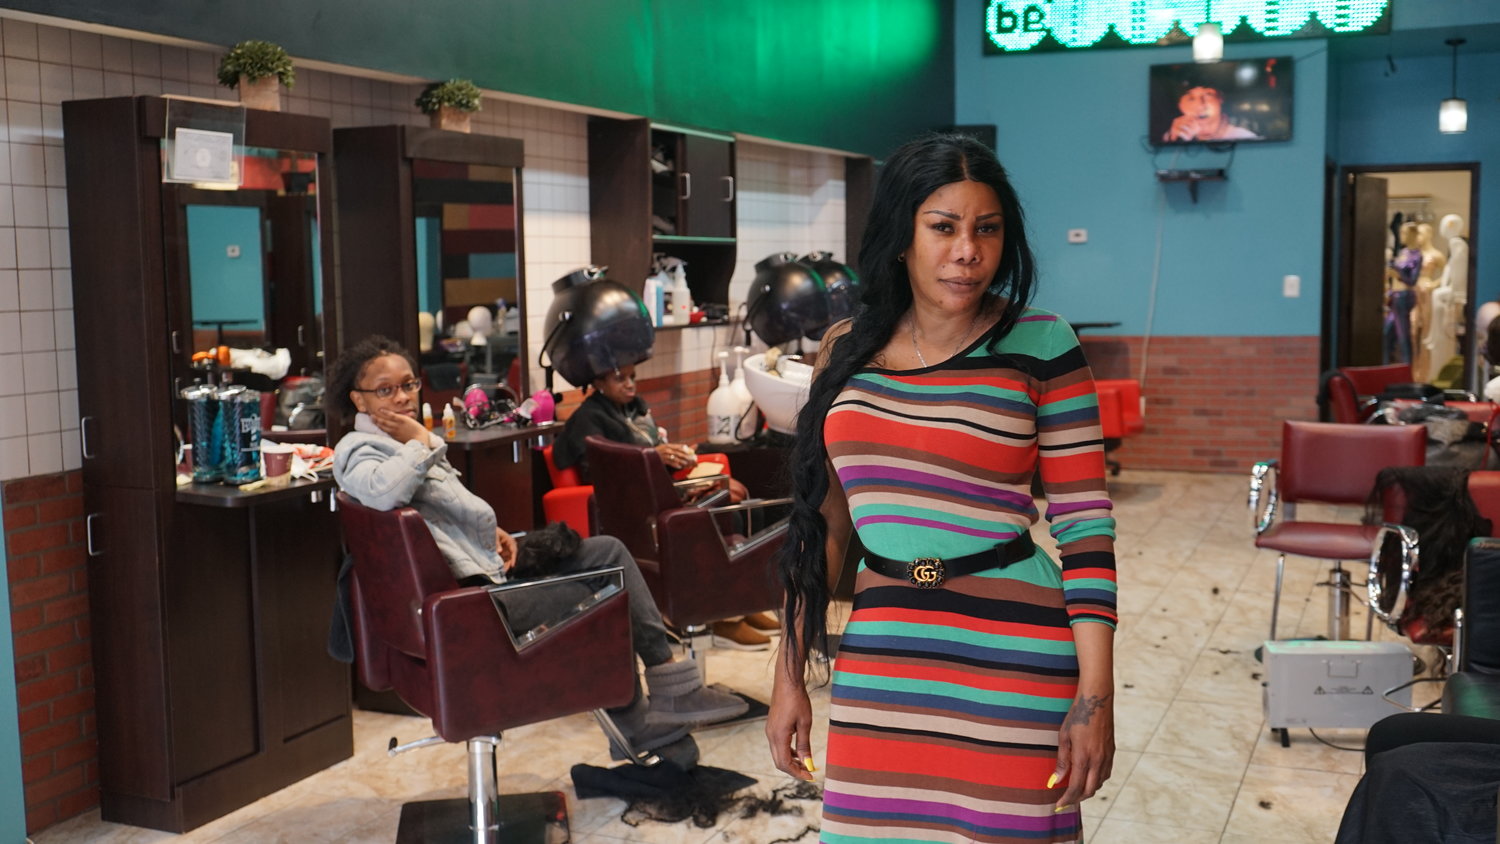 With the number of coronavirus cases soaring statewide, Mitzs Trend Inc. owner Mitzs Walcott said the order to close all barbershops, hair and nail salons in New York was likely necessary. "Our life is more valuable than anything," she said.